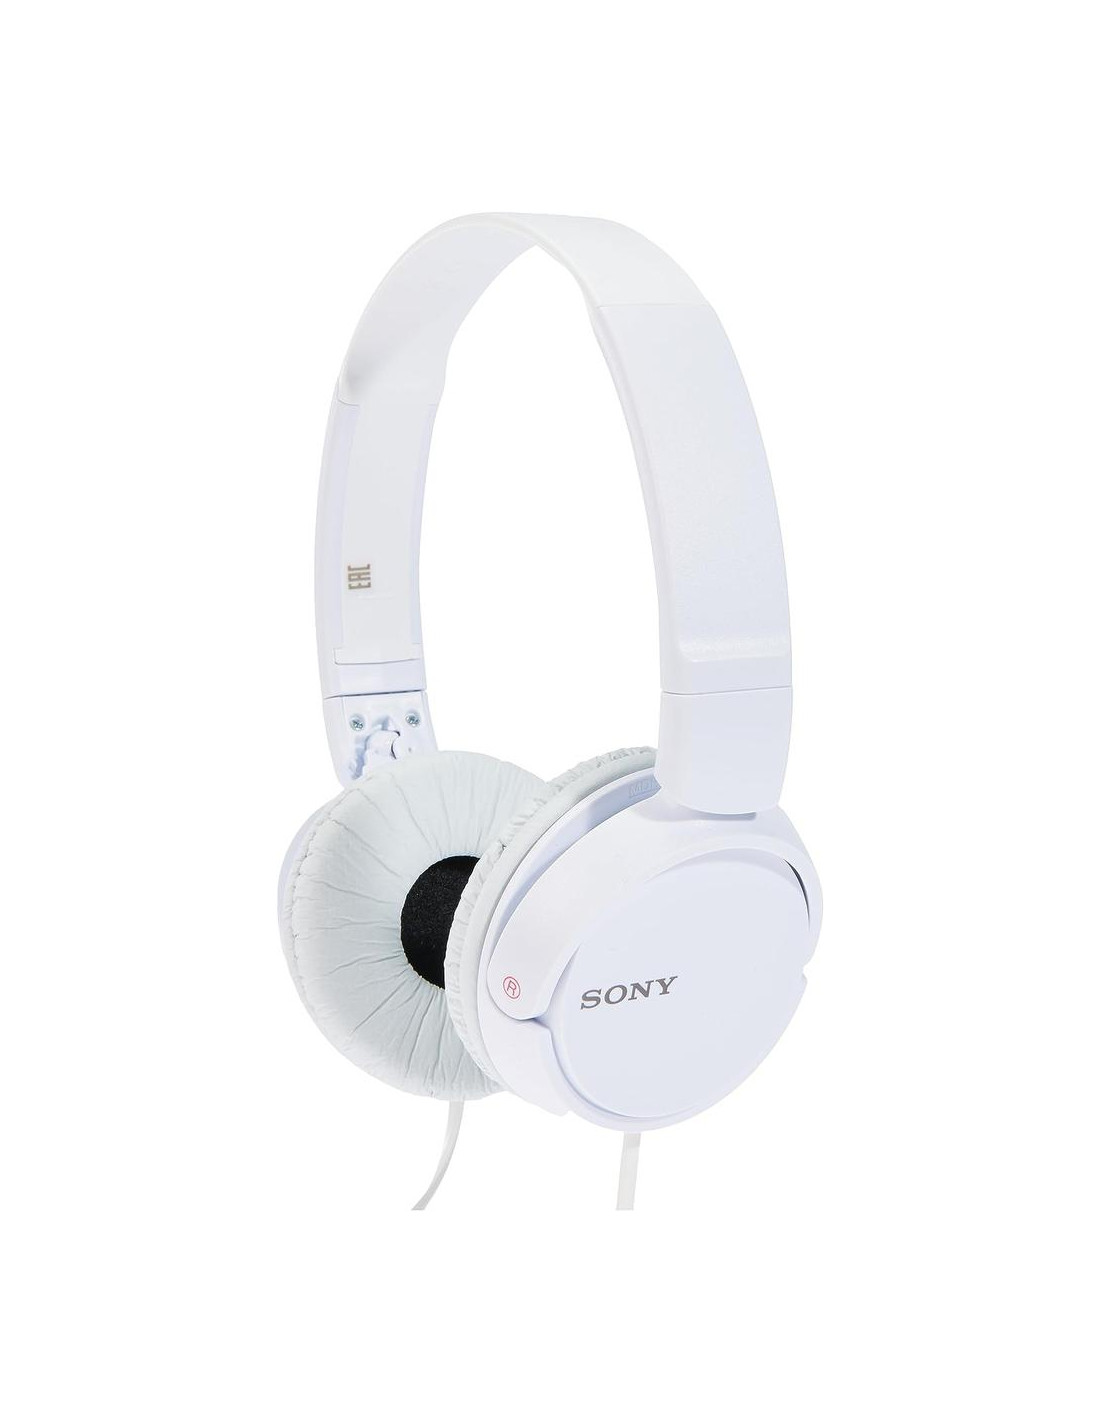 AURICULARES STEREO SONY MDR-ZX110 BLANCOS